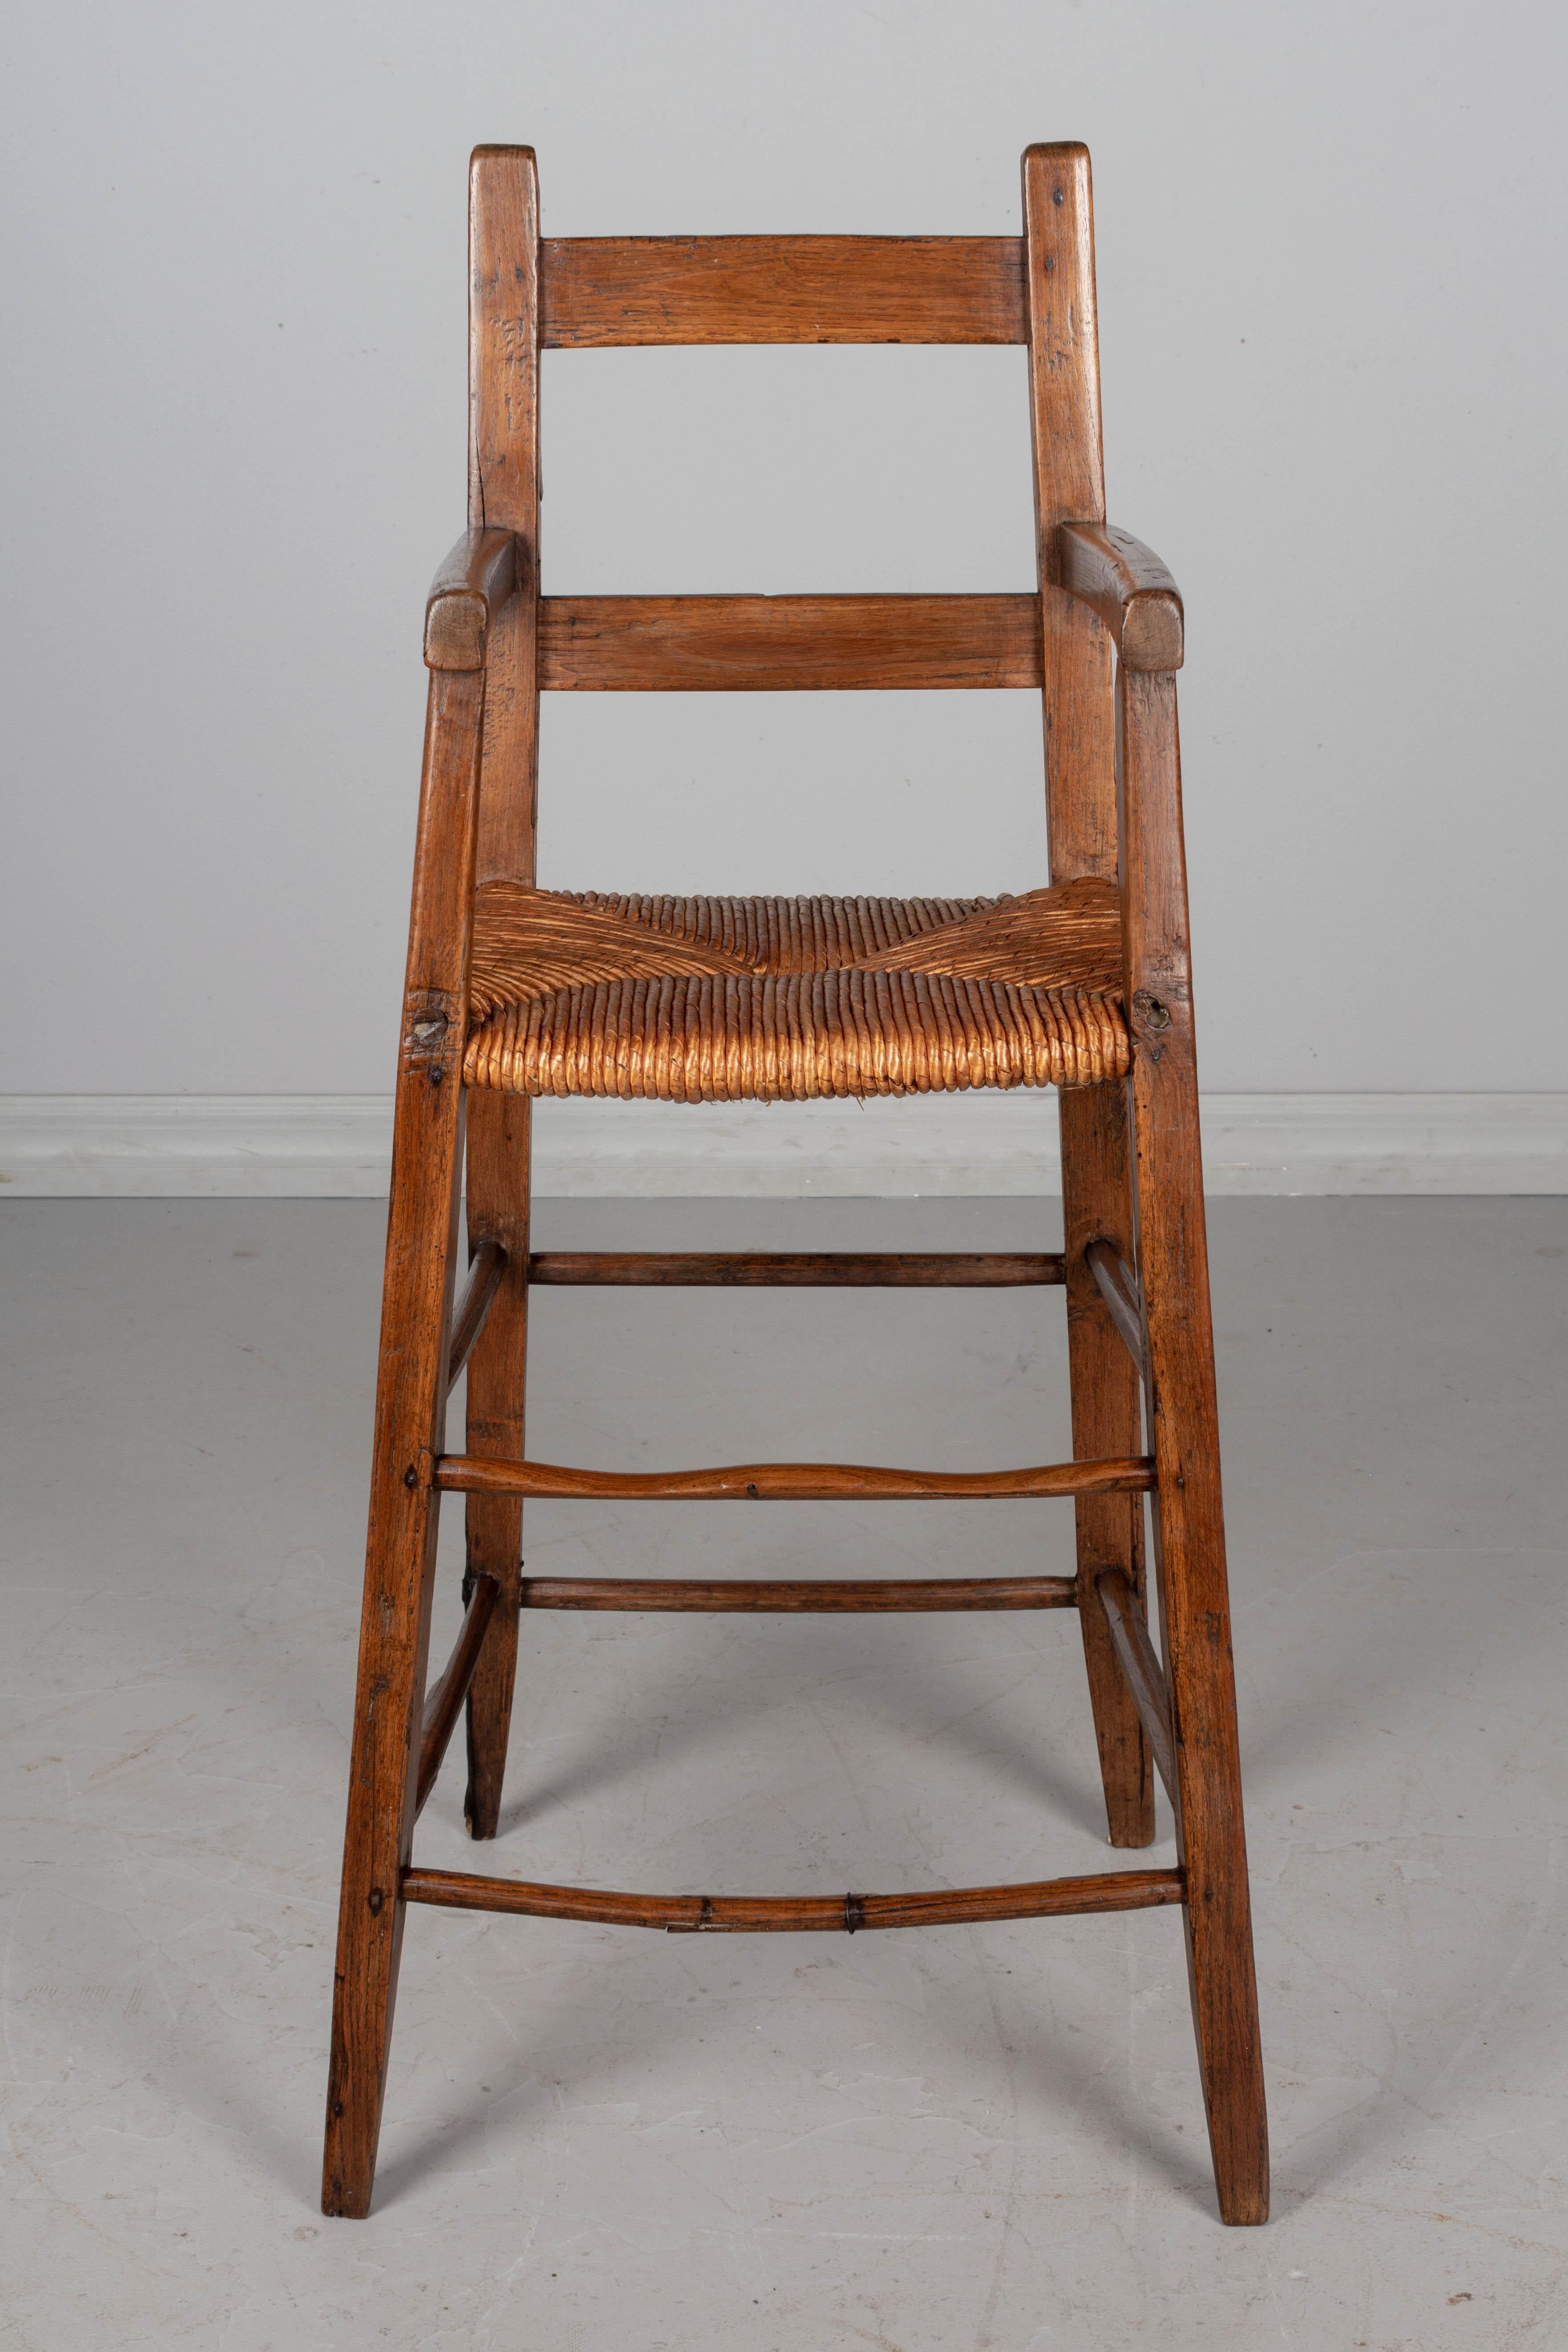 Hand-Crafted 19th Century Country French Child's High Chair